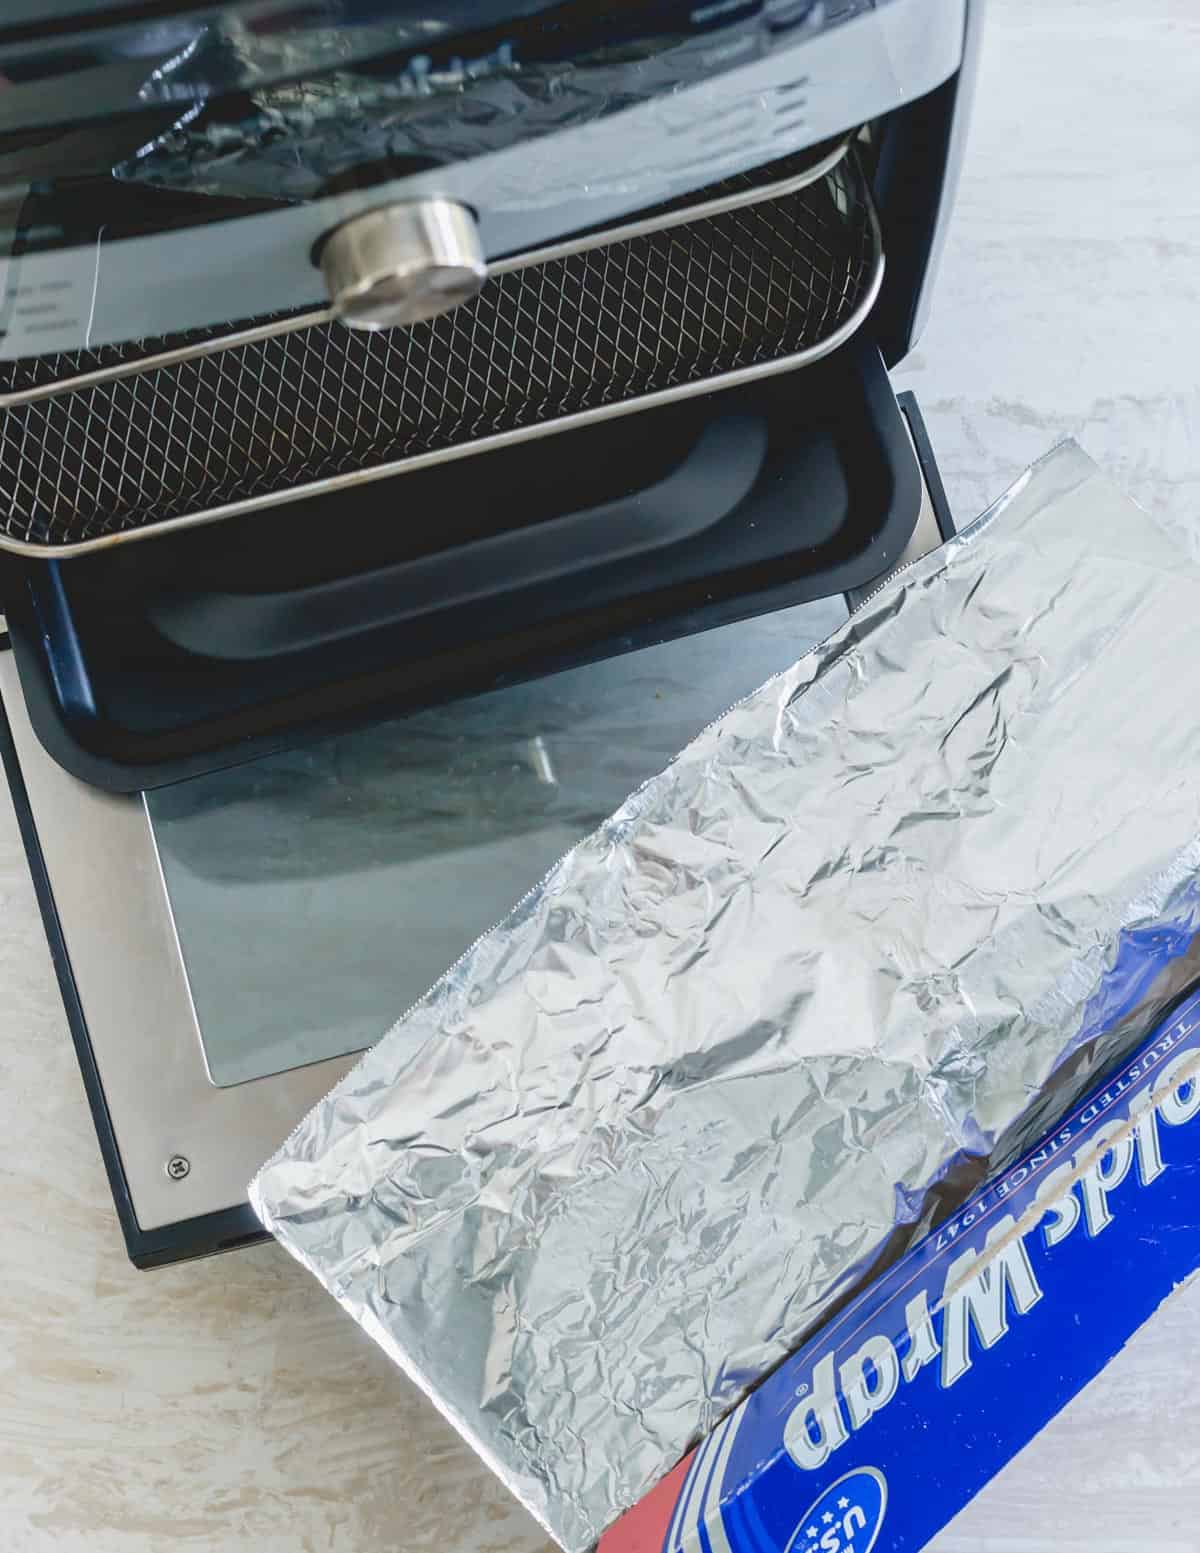 Pampered Chef deluxe air fryer with aluminum foil next to it.